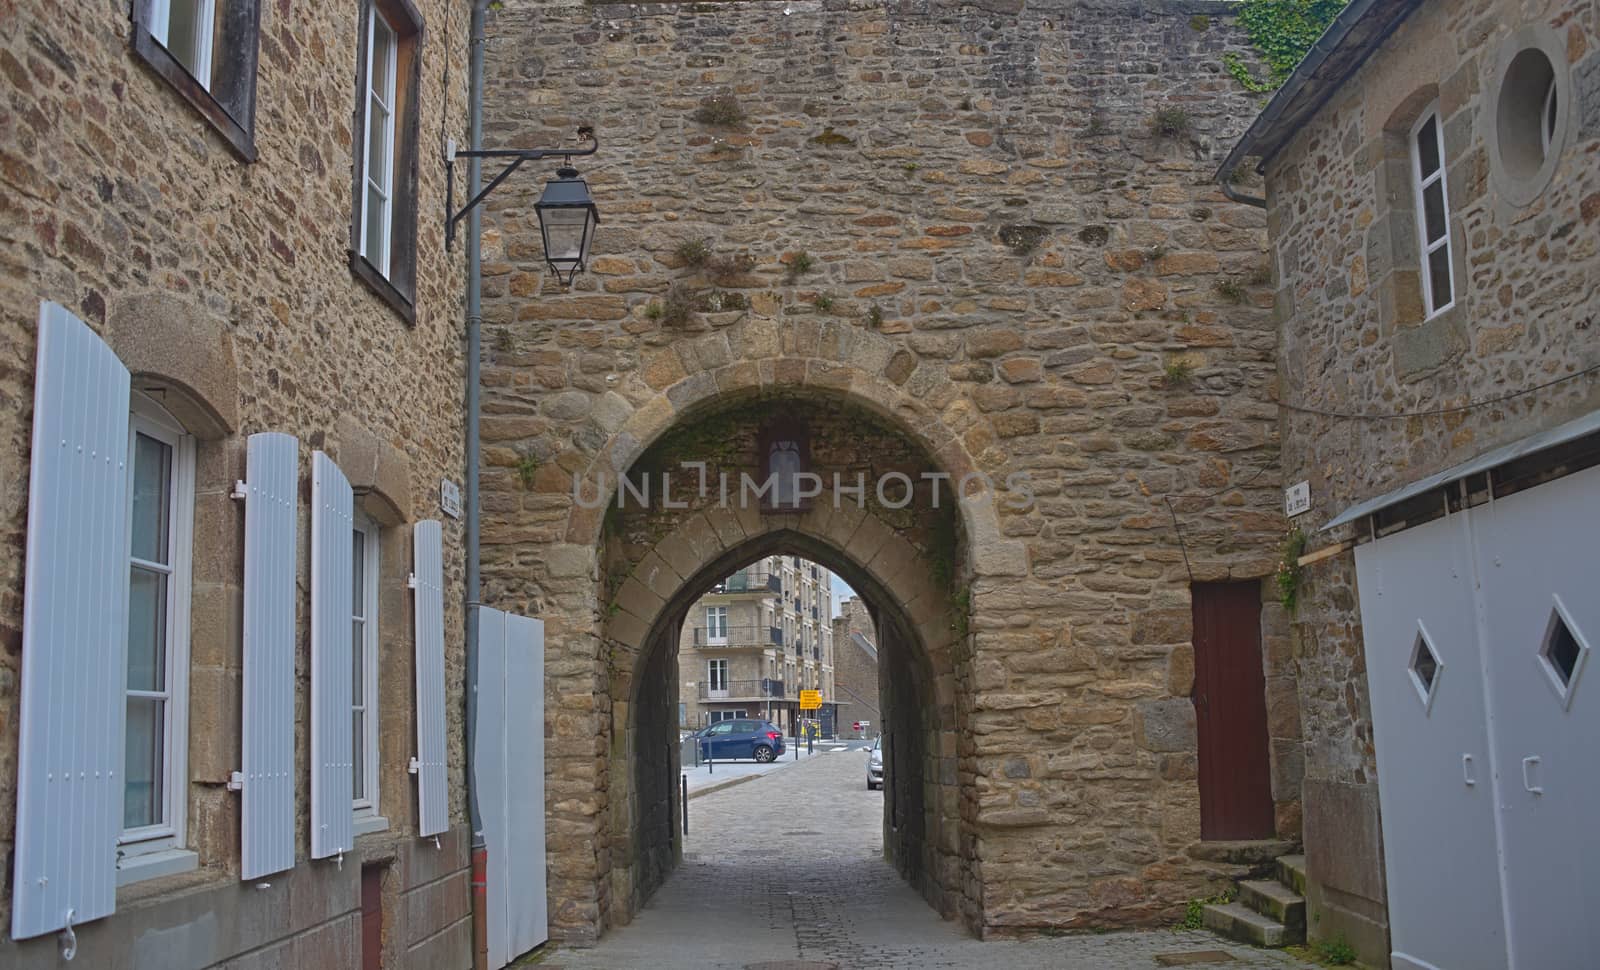 Exit gate from old town at Dinan, France by sheriffkule